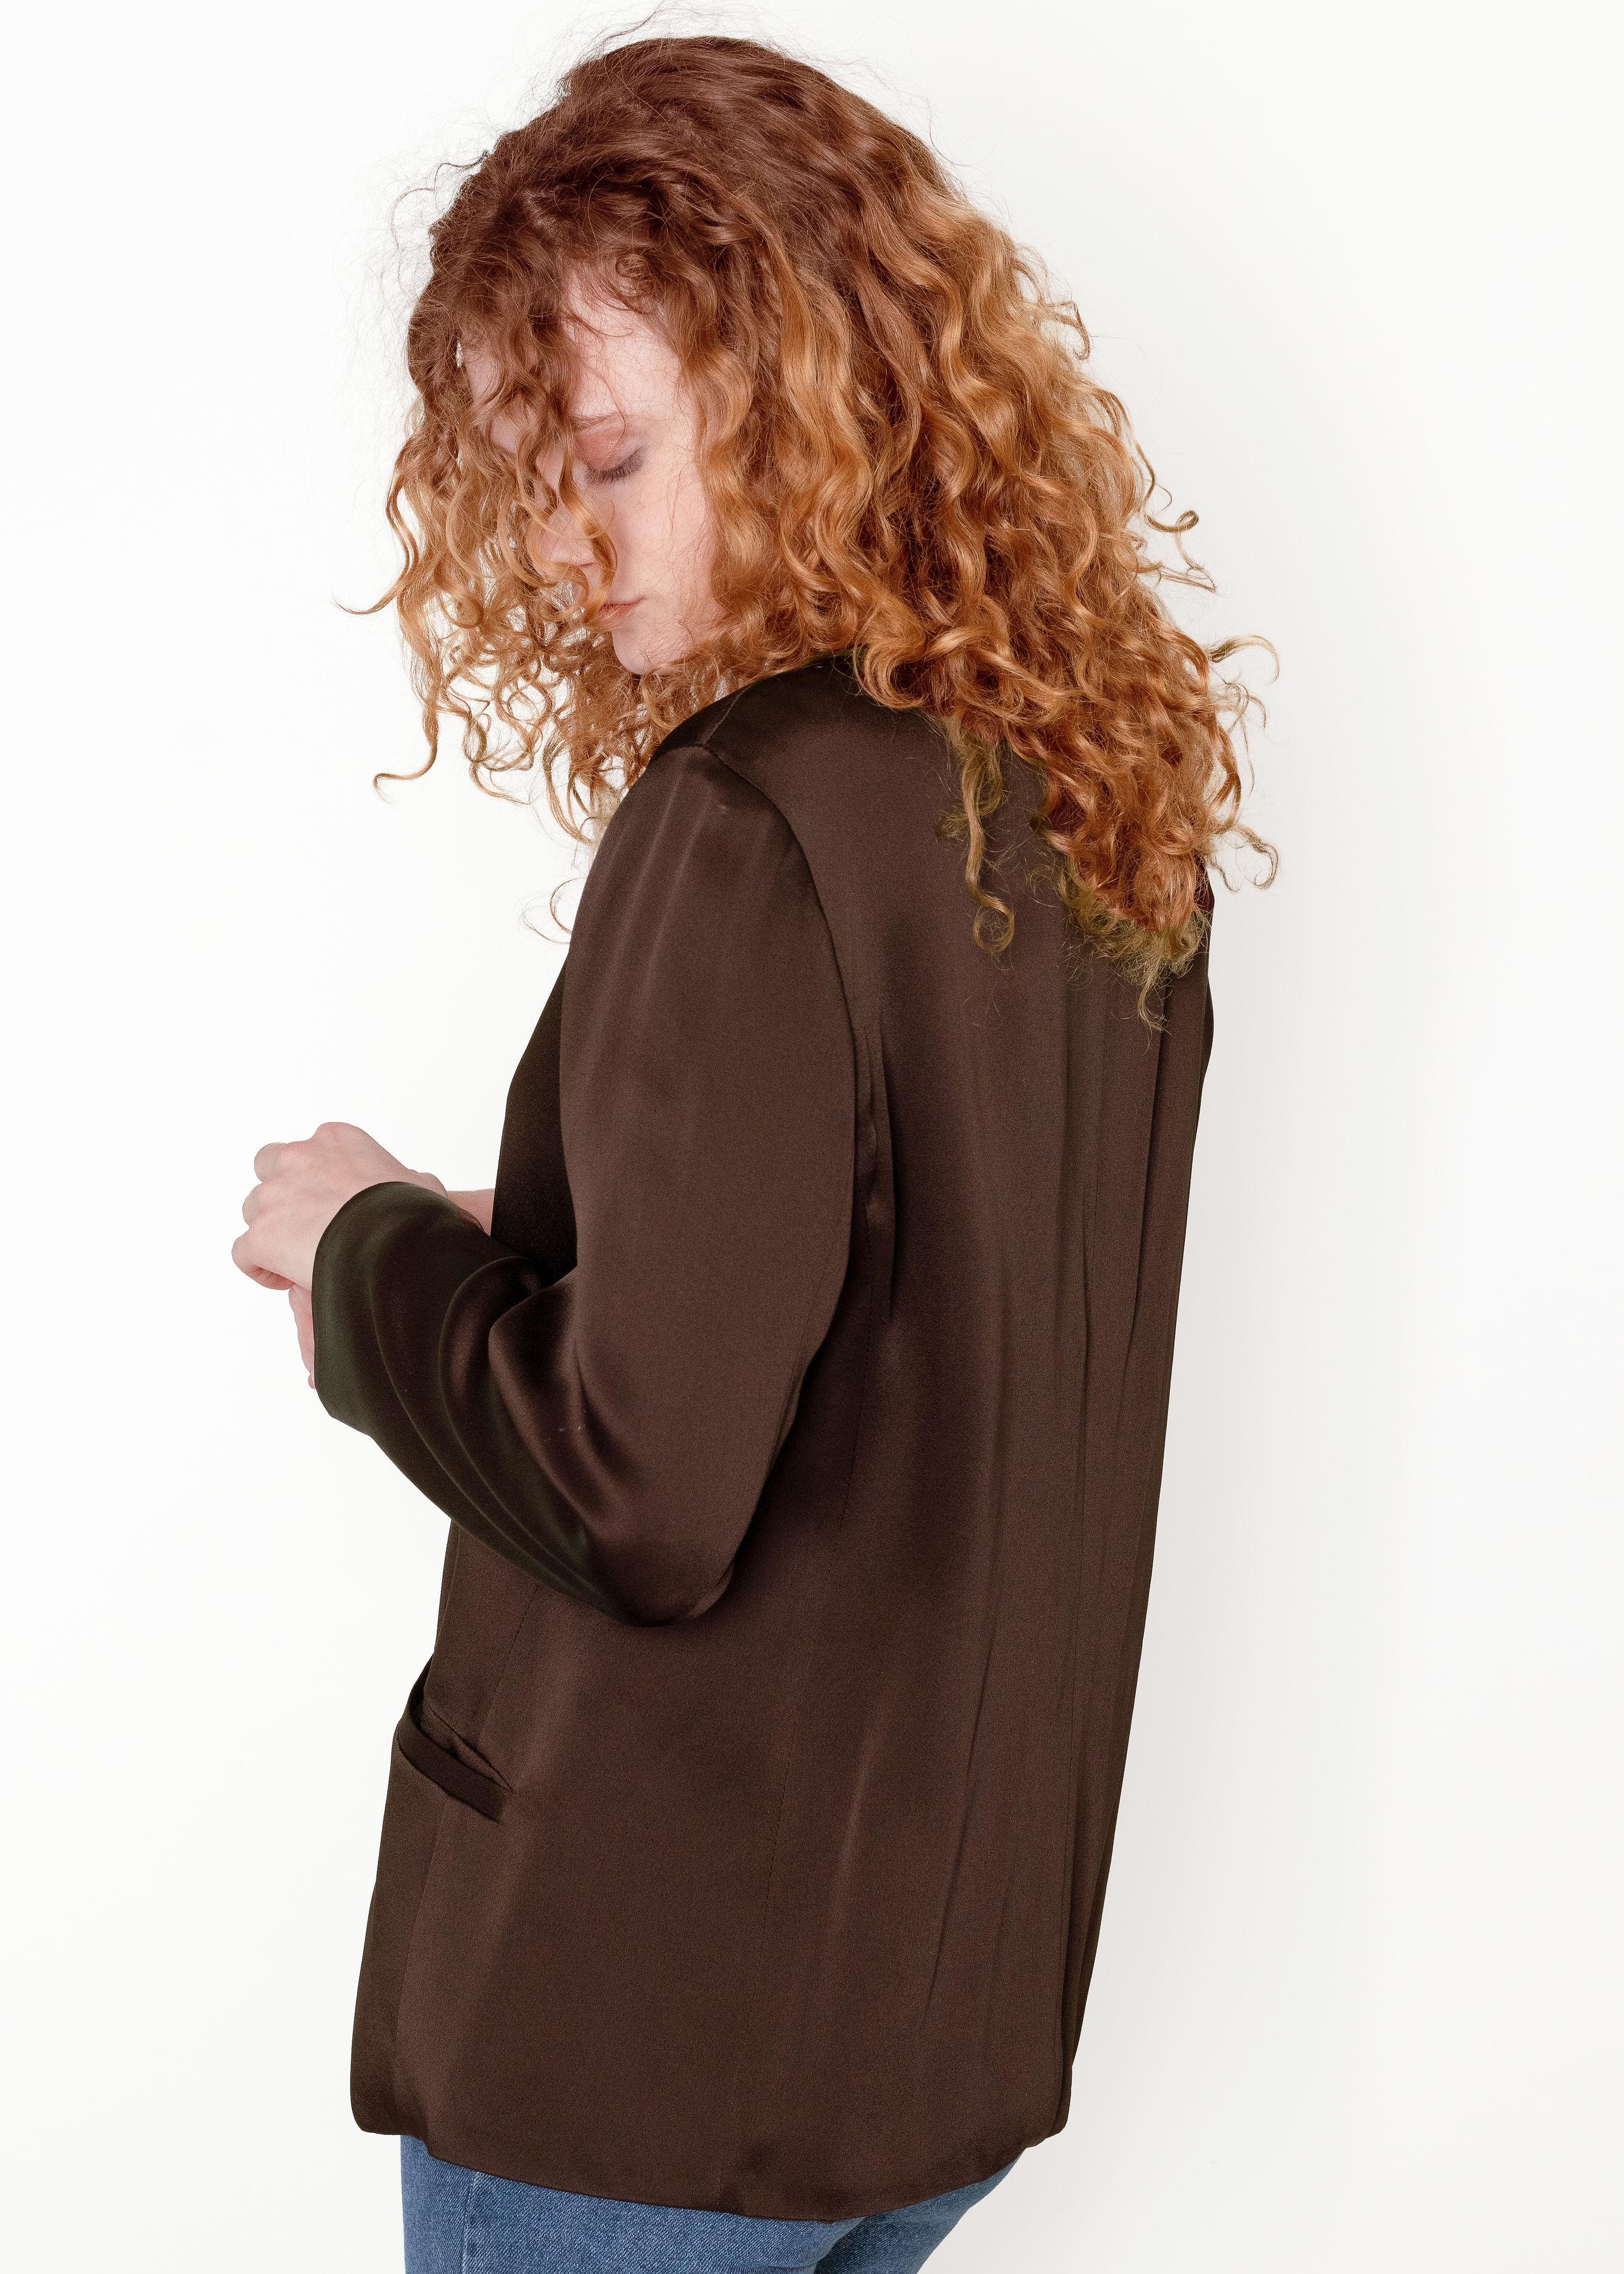 This beautiful Armani collezoni button up brown blouse is made with 65% acetate and 35% rayon, with a 100% polyester lining for comfort. The satin fabric adds a touch of luxury to any outfit. The hidden buttons and two pockets add a unique touch of